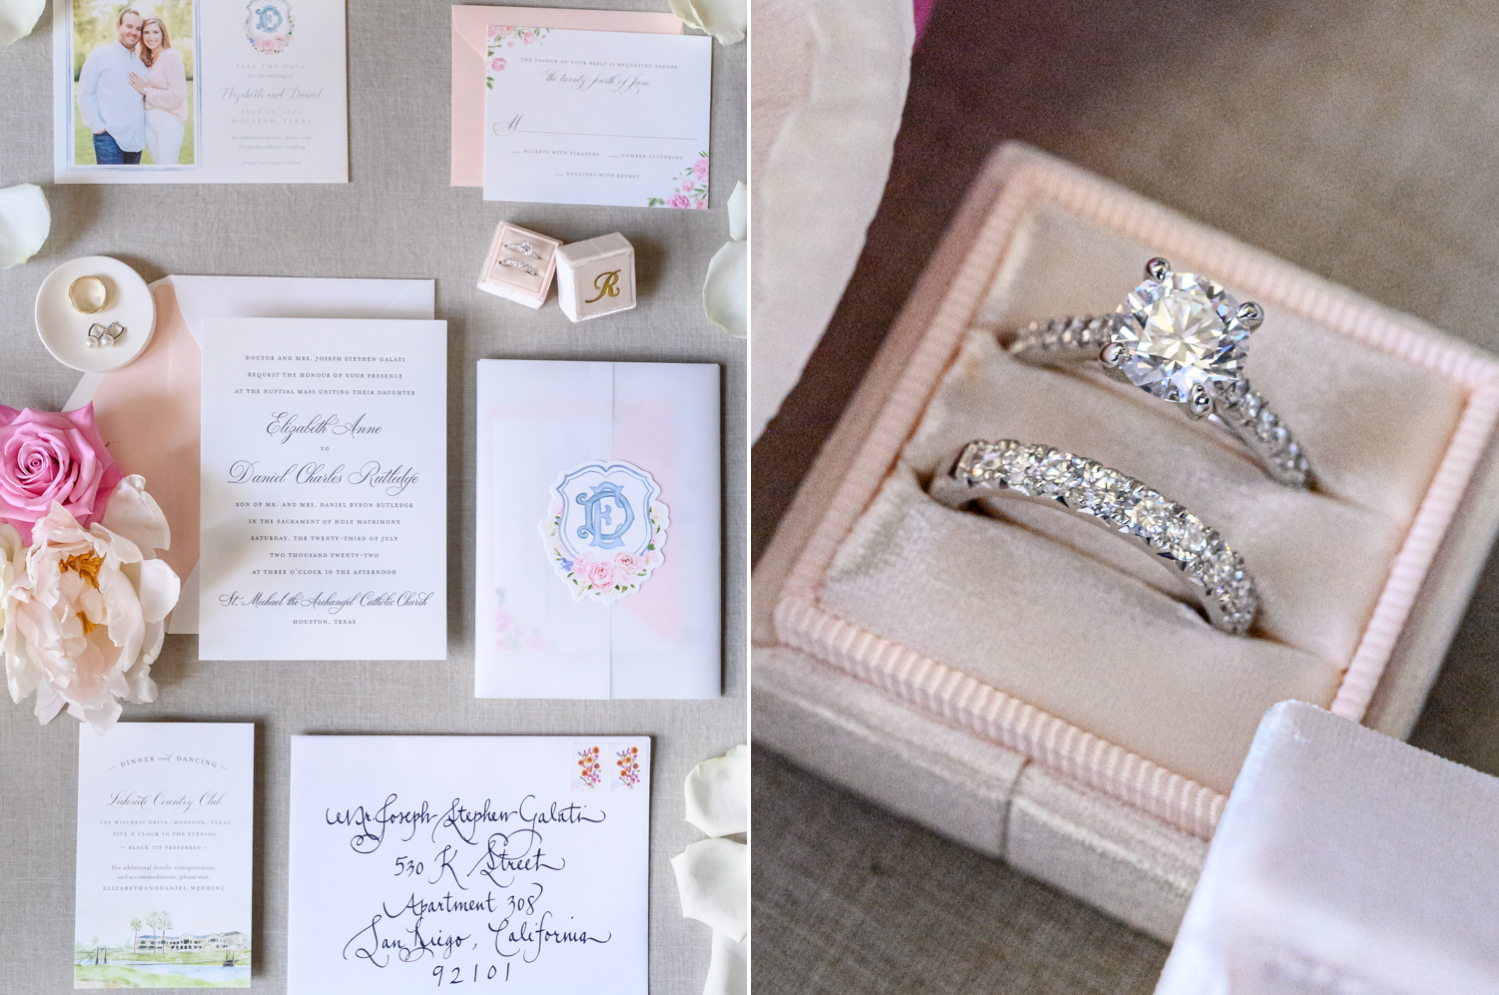 Pastel blue and pink wedding stationery 
Engagement ring and wedding band in pink box 